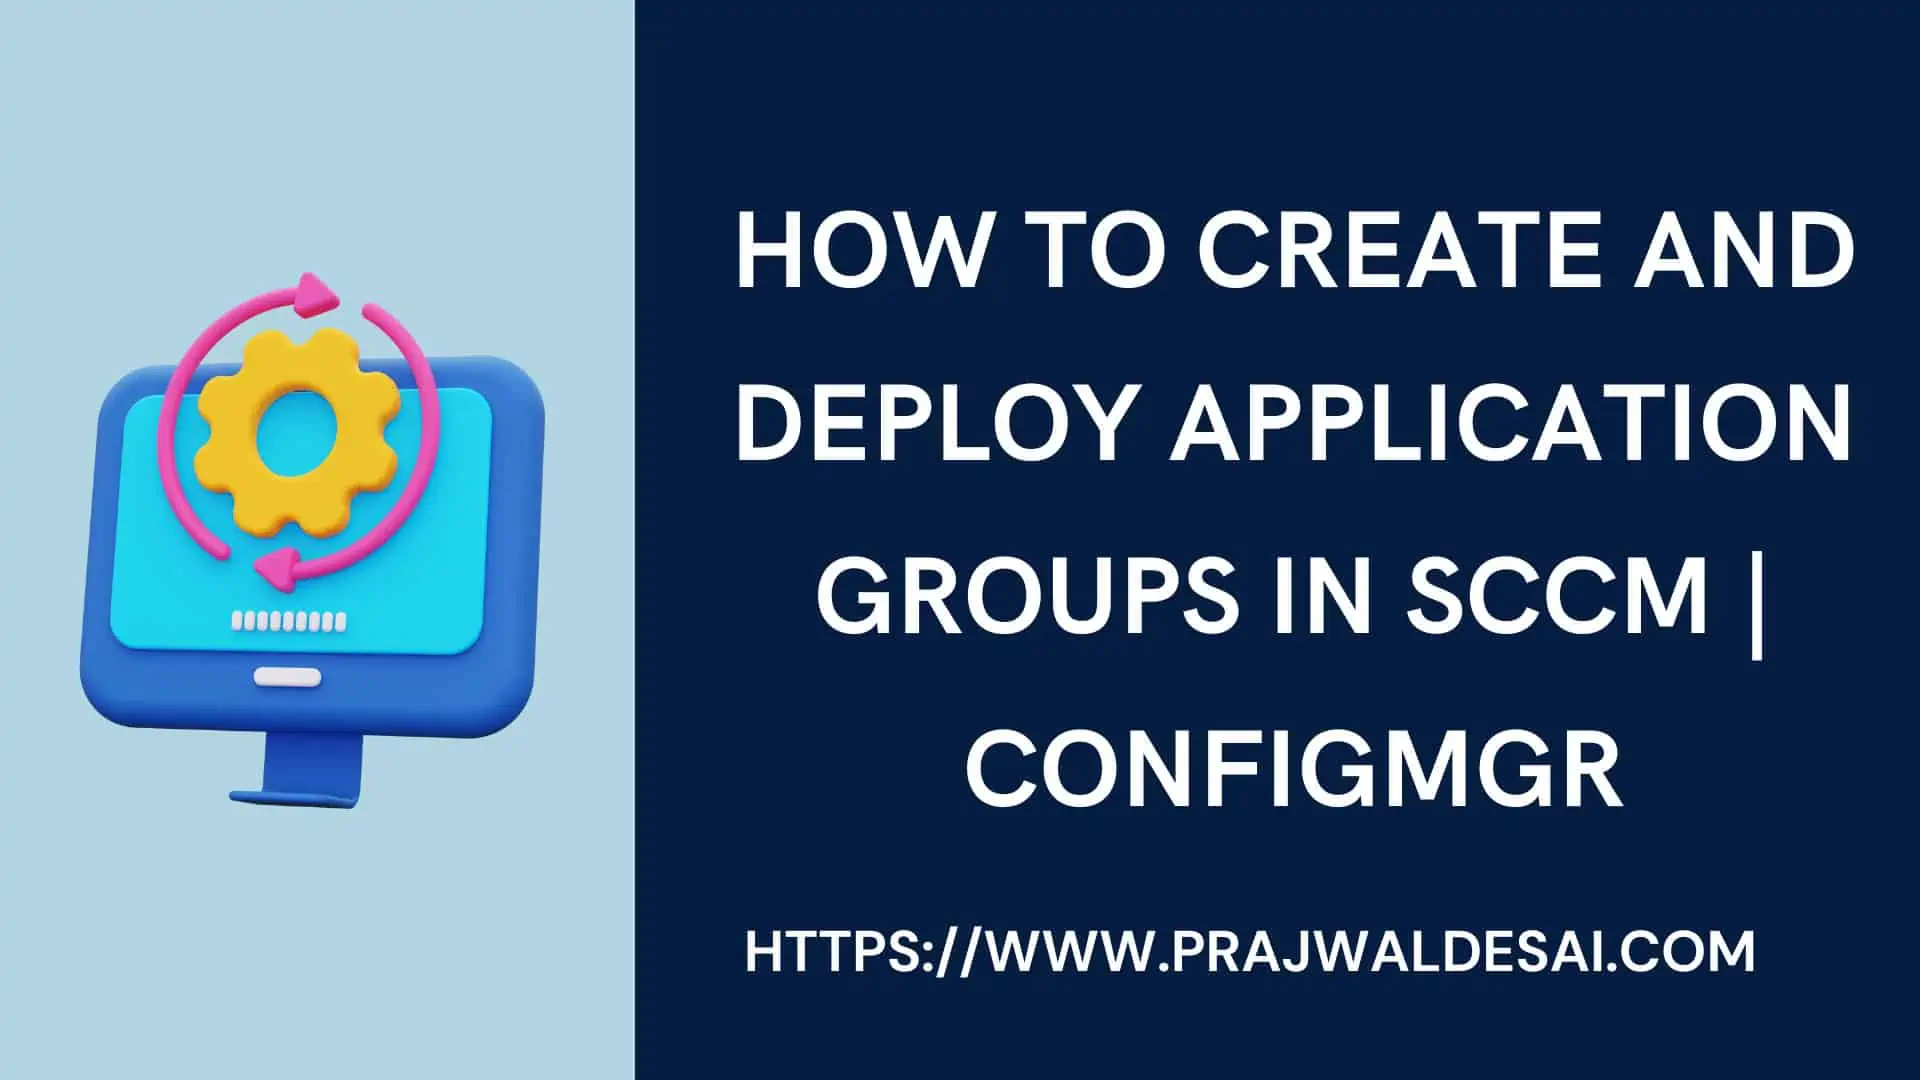 Create and Deploy Application Groups in SCCM